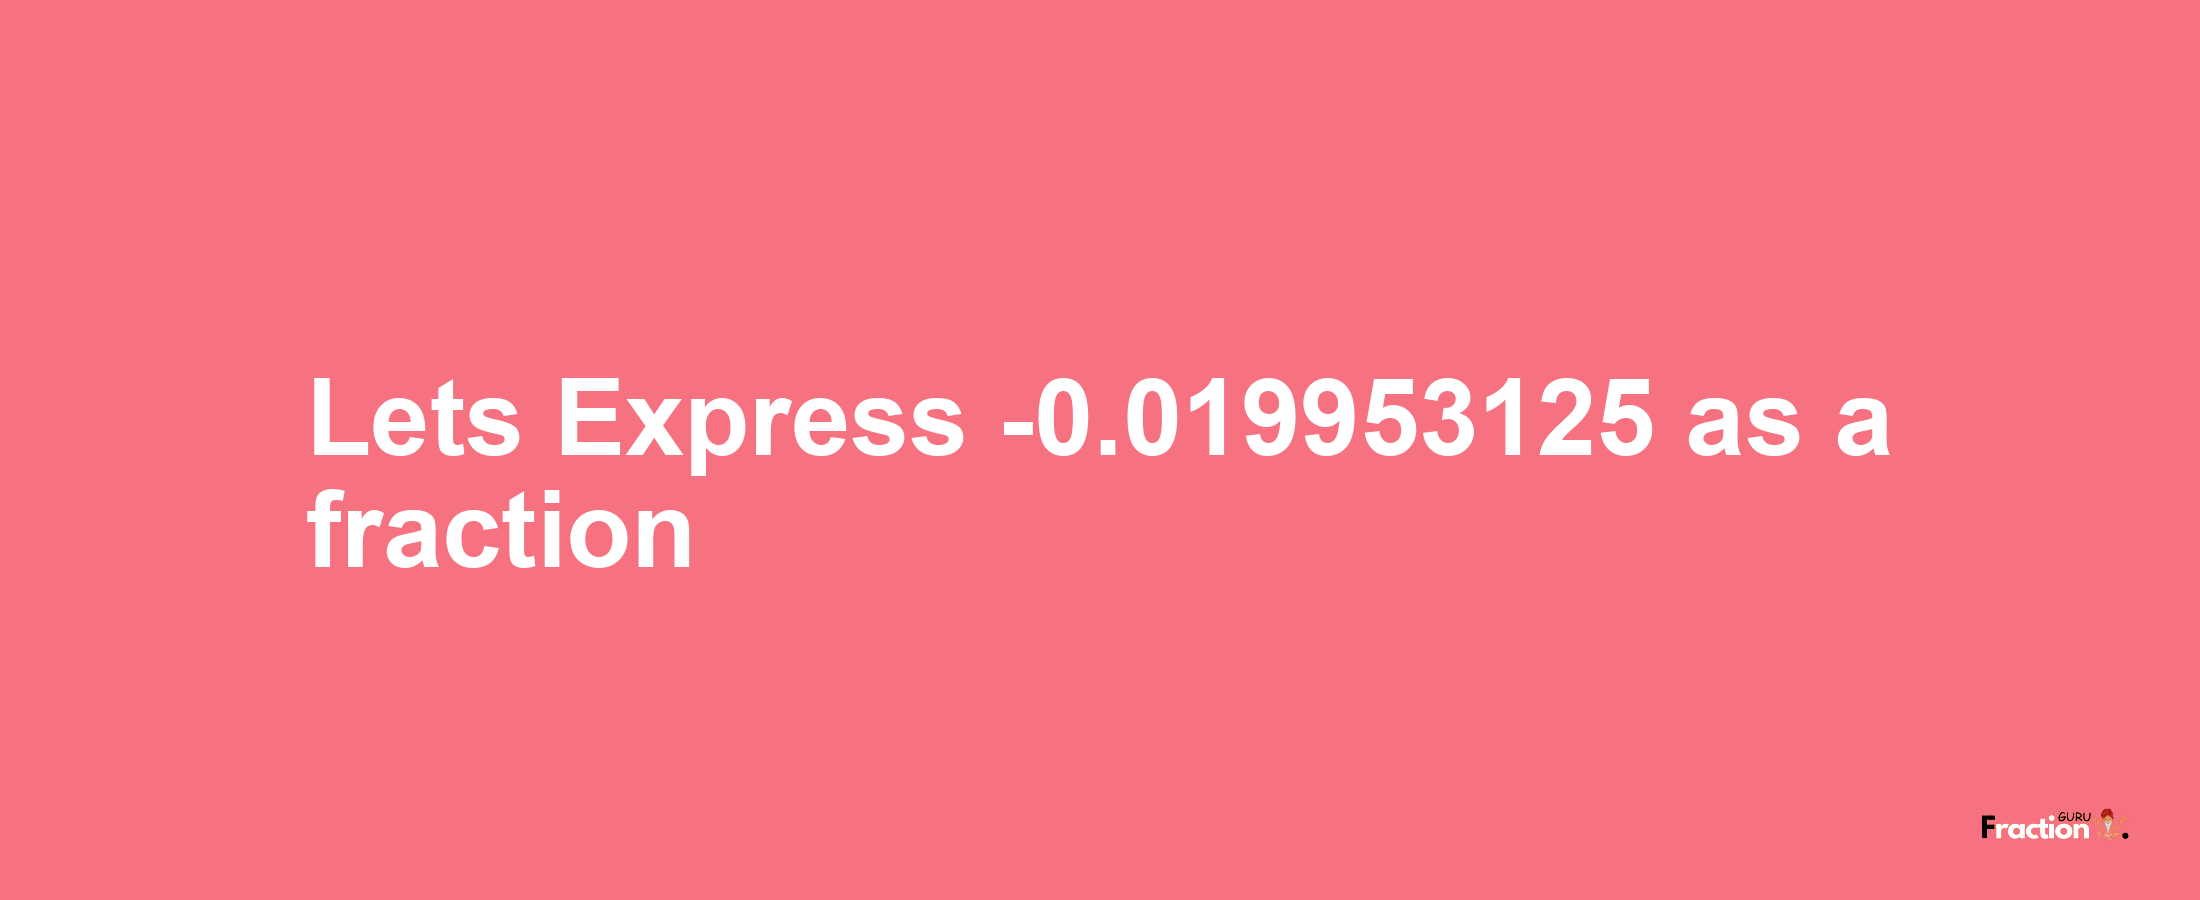 Lets Express -0.019953125 as afraction